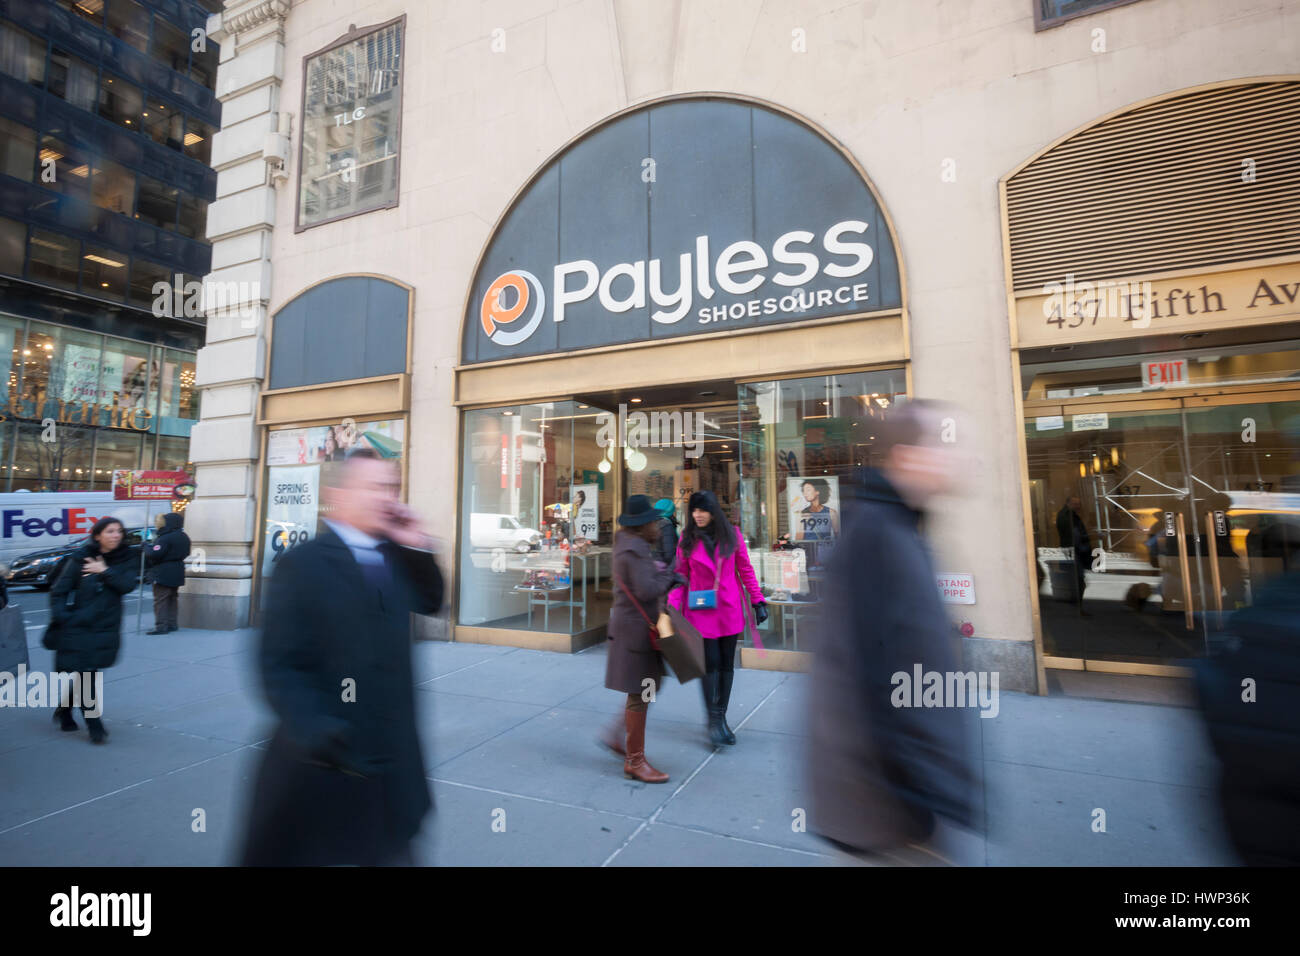 A soon to be closed Payless ShoeSource store in New York on Wednesday, March 22, 2017. Payless plans to shutter between 400 and 500 stores and is reported to be ready to seek bankruptcy protection next week. (© Richard B. Levine) Stock Photo